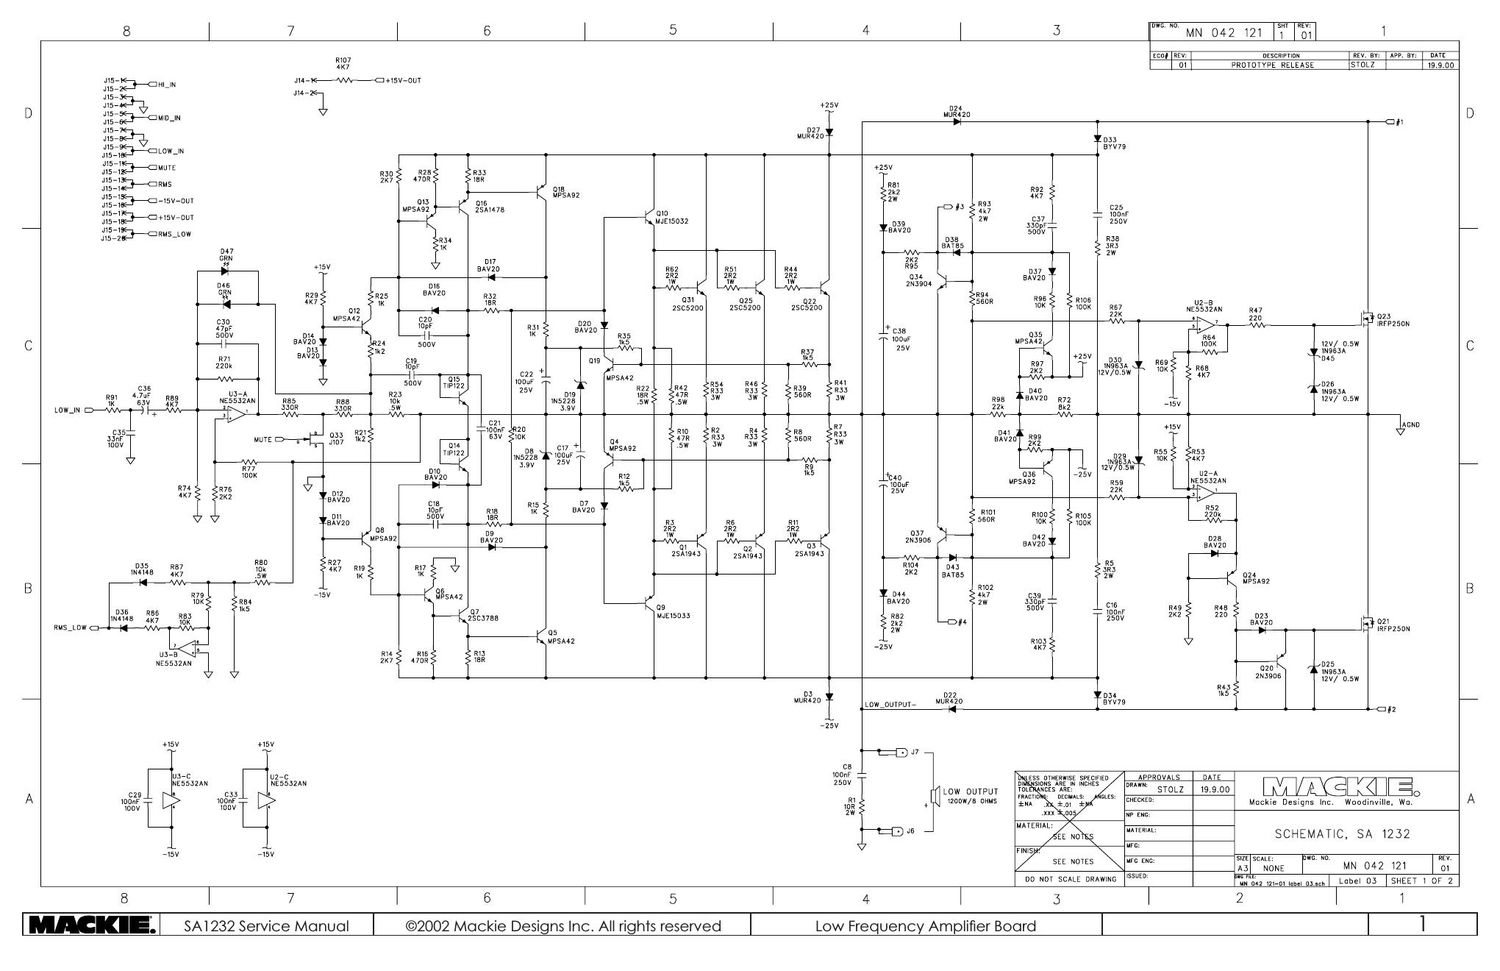 Mackie SA1232 Low Frequency Power Amp Schematics